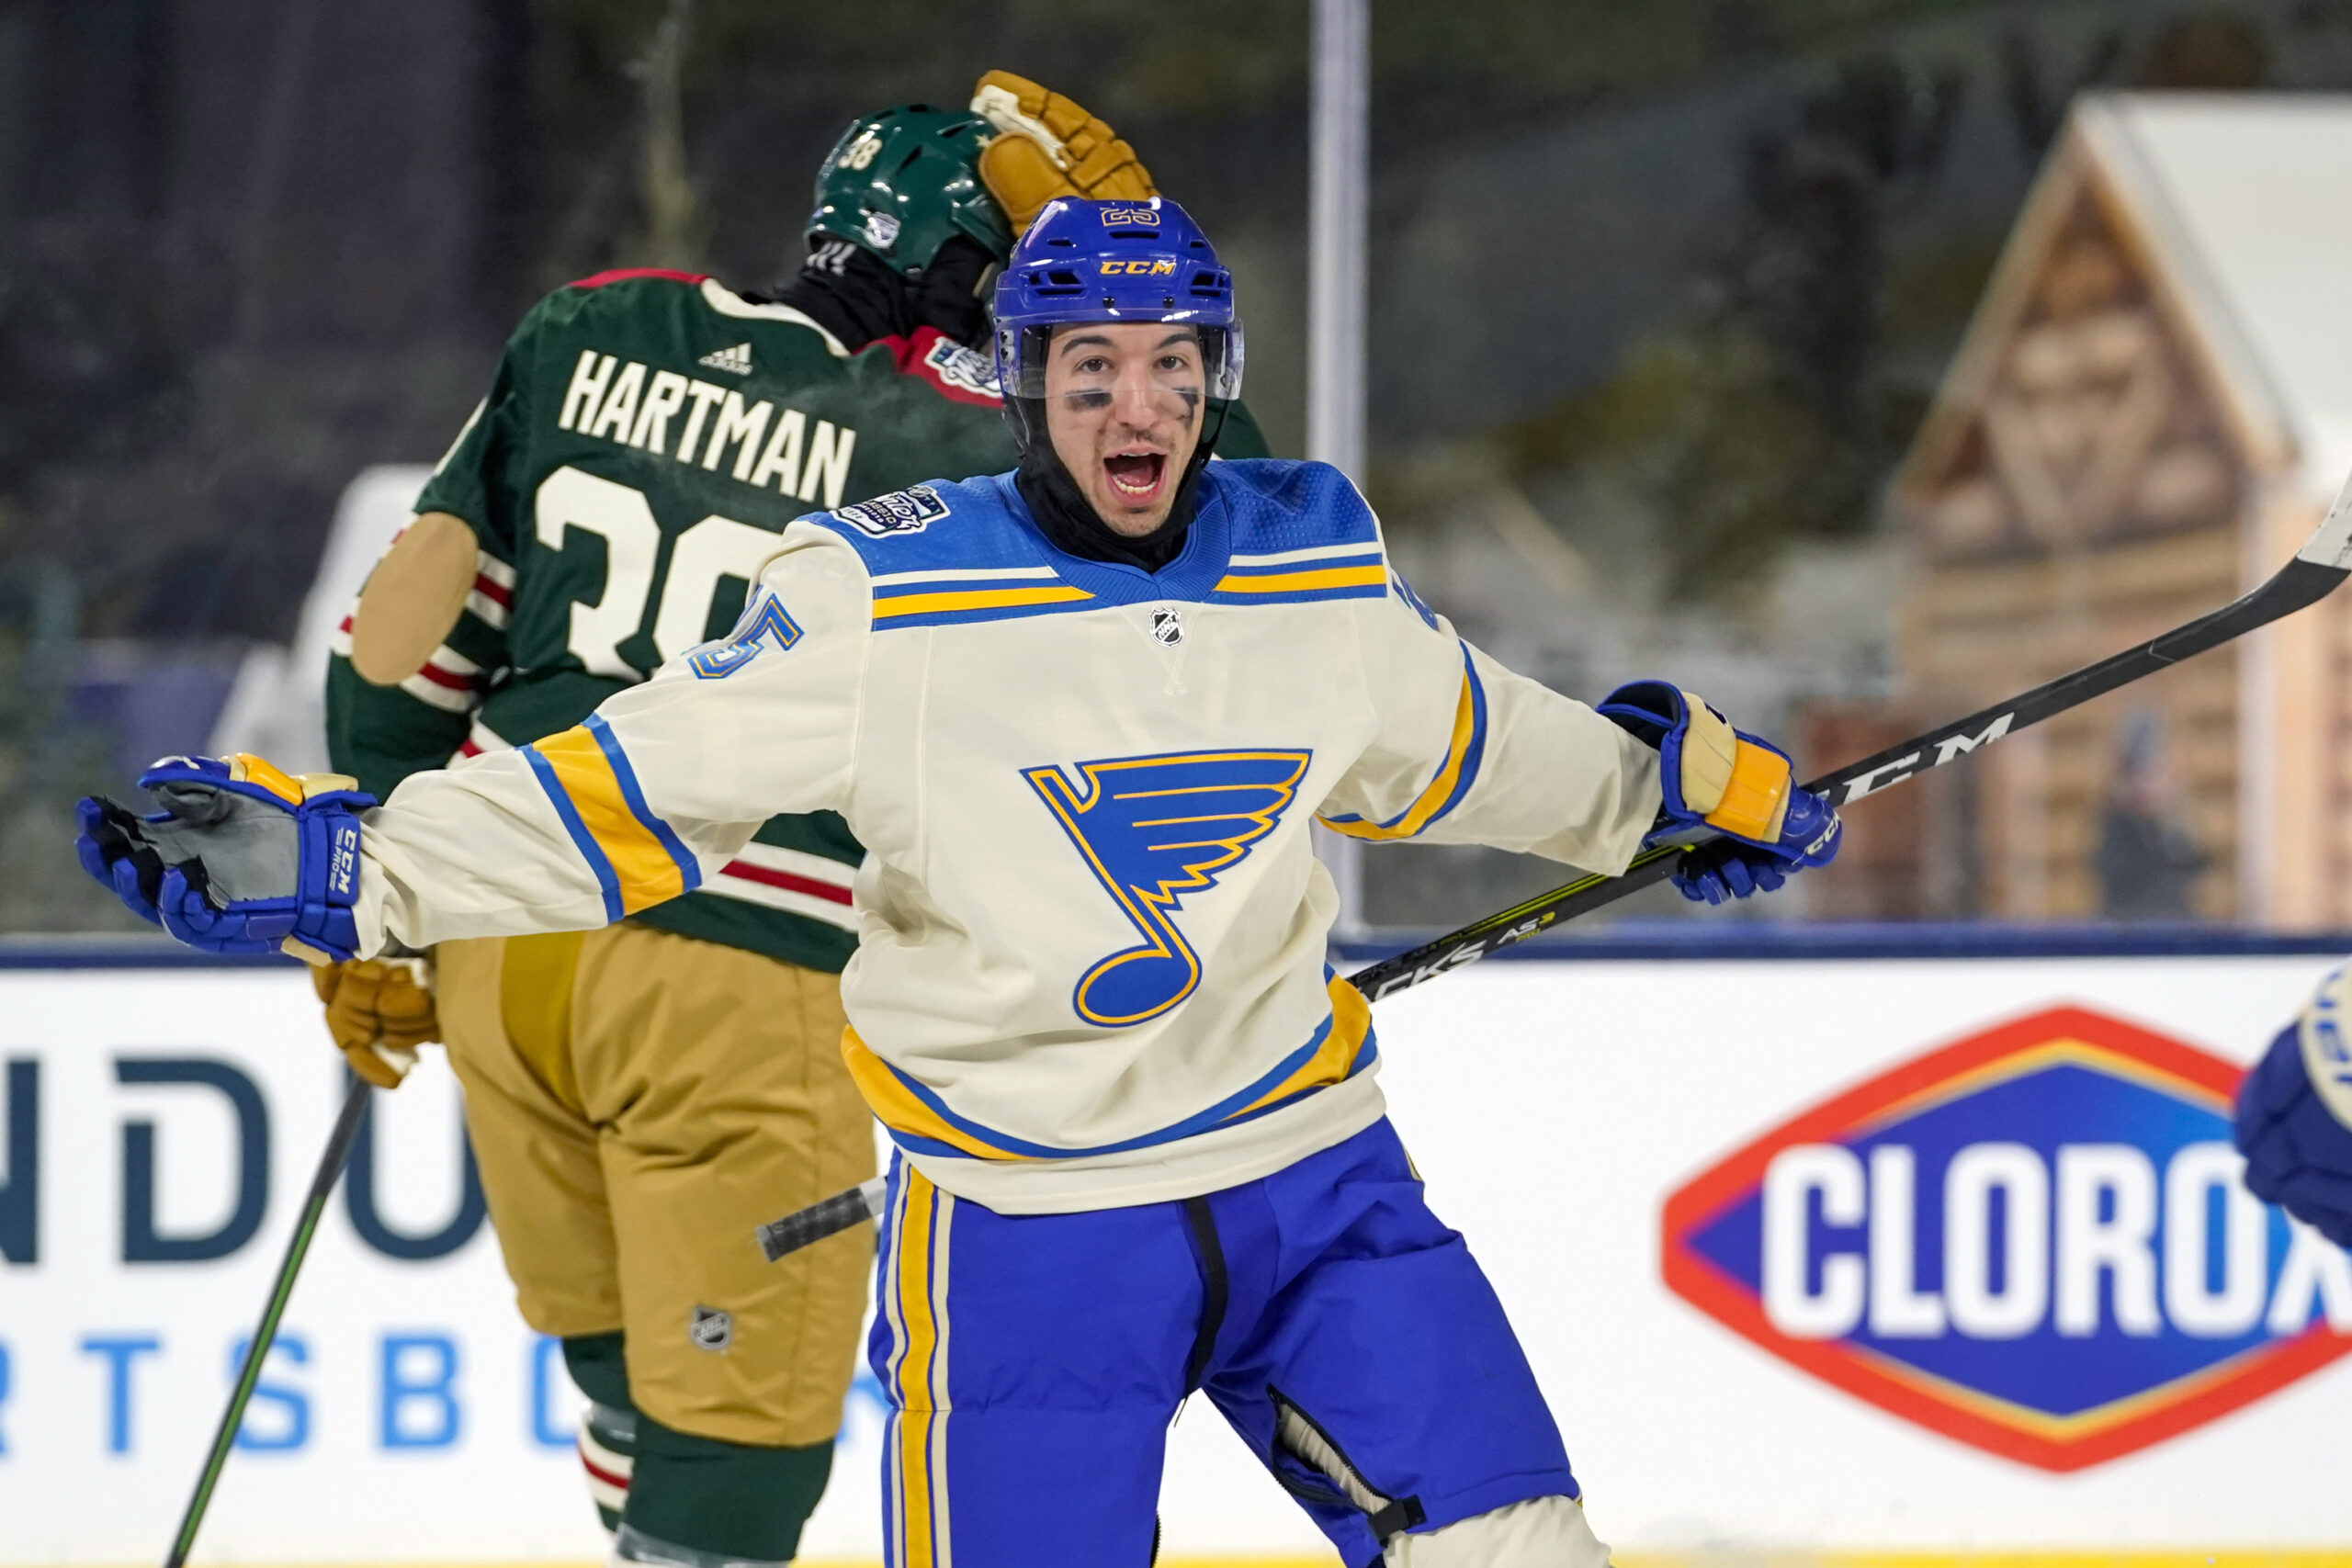 Winter Classic: St. Louis Blues vs. Minnesota Wild, live updates, game  score, analysis from Target Field - The Athletic